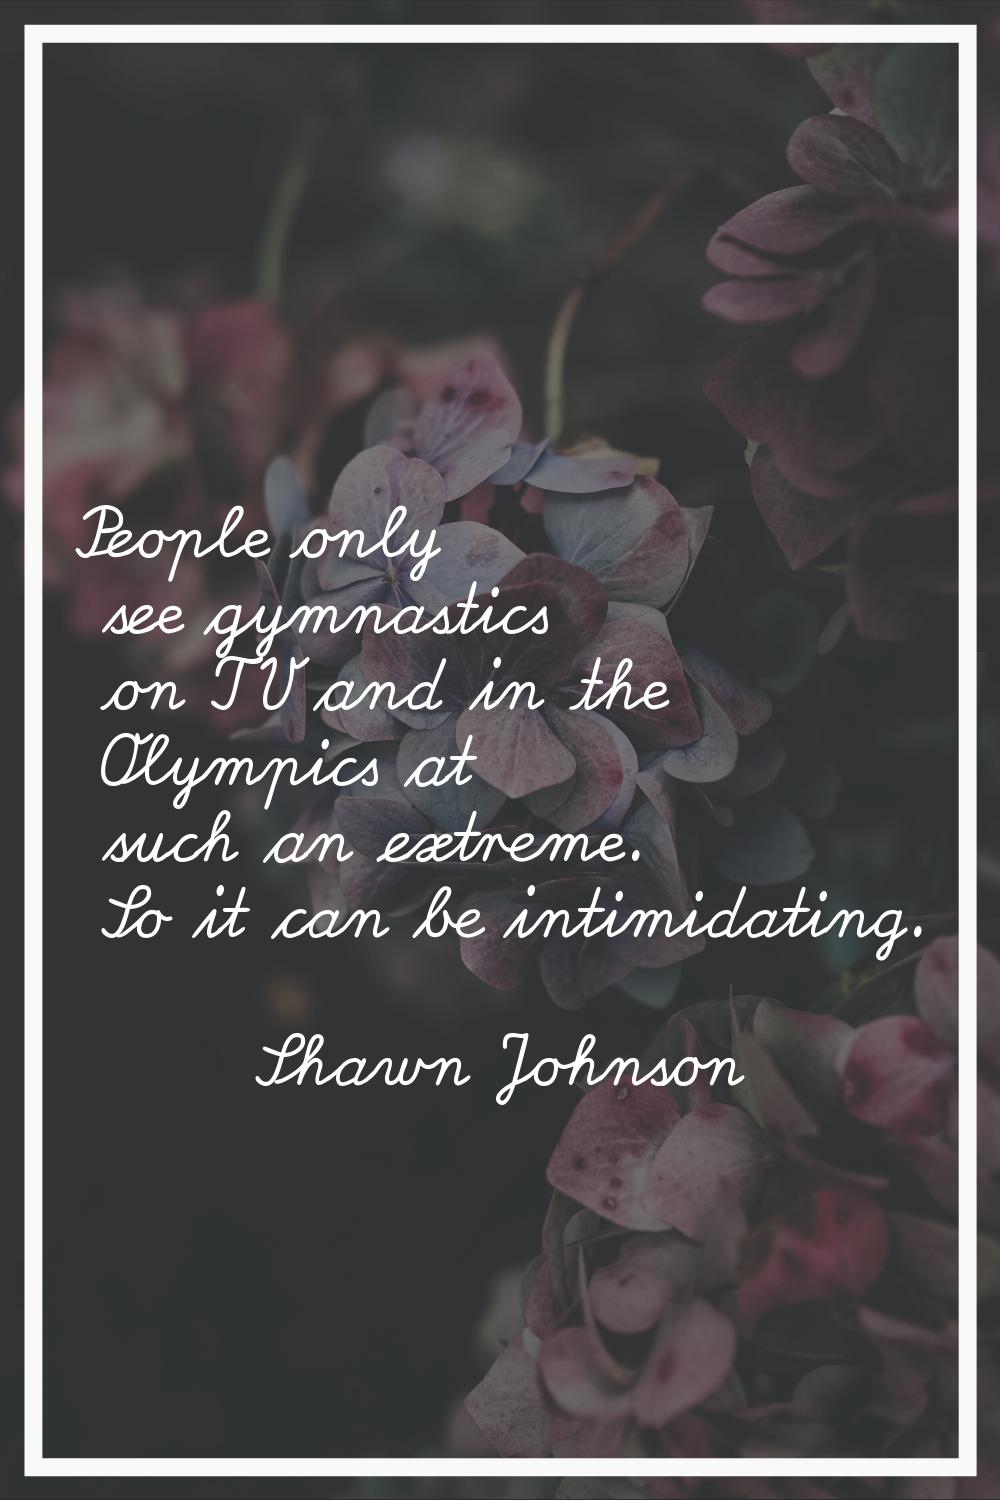 People only see gymnastics on TV and in the Olympics at such an extreme. So it can be intimidating.